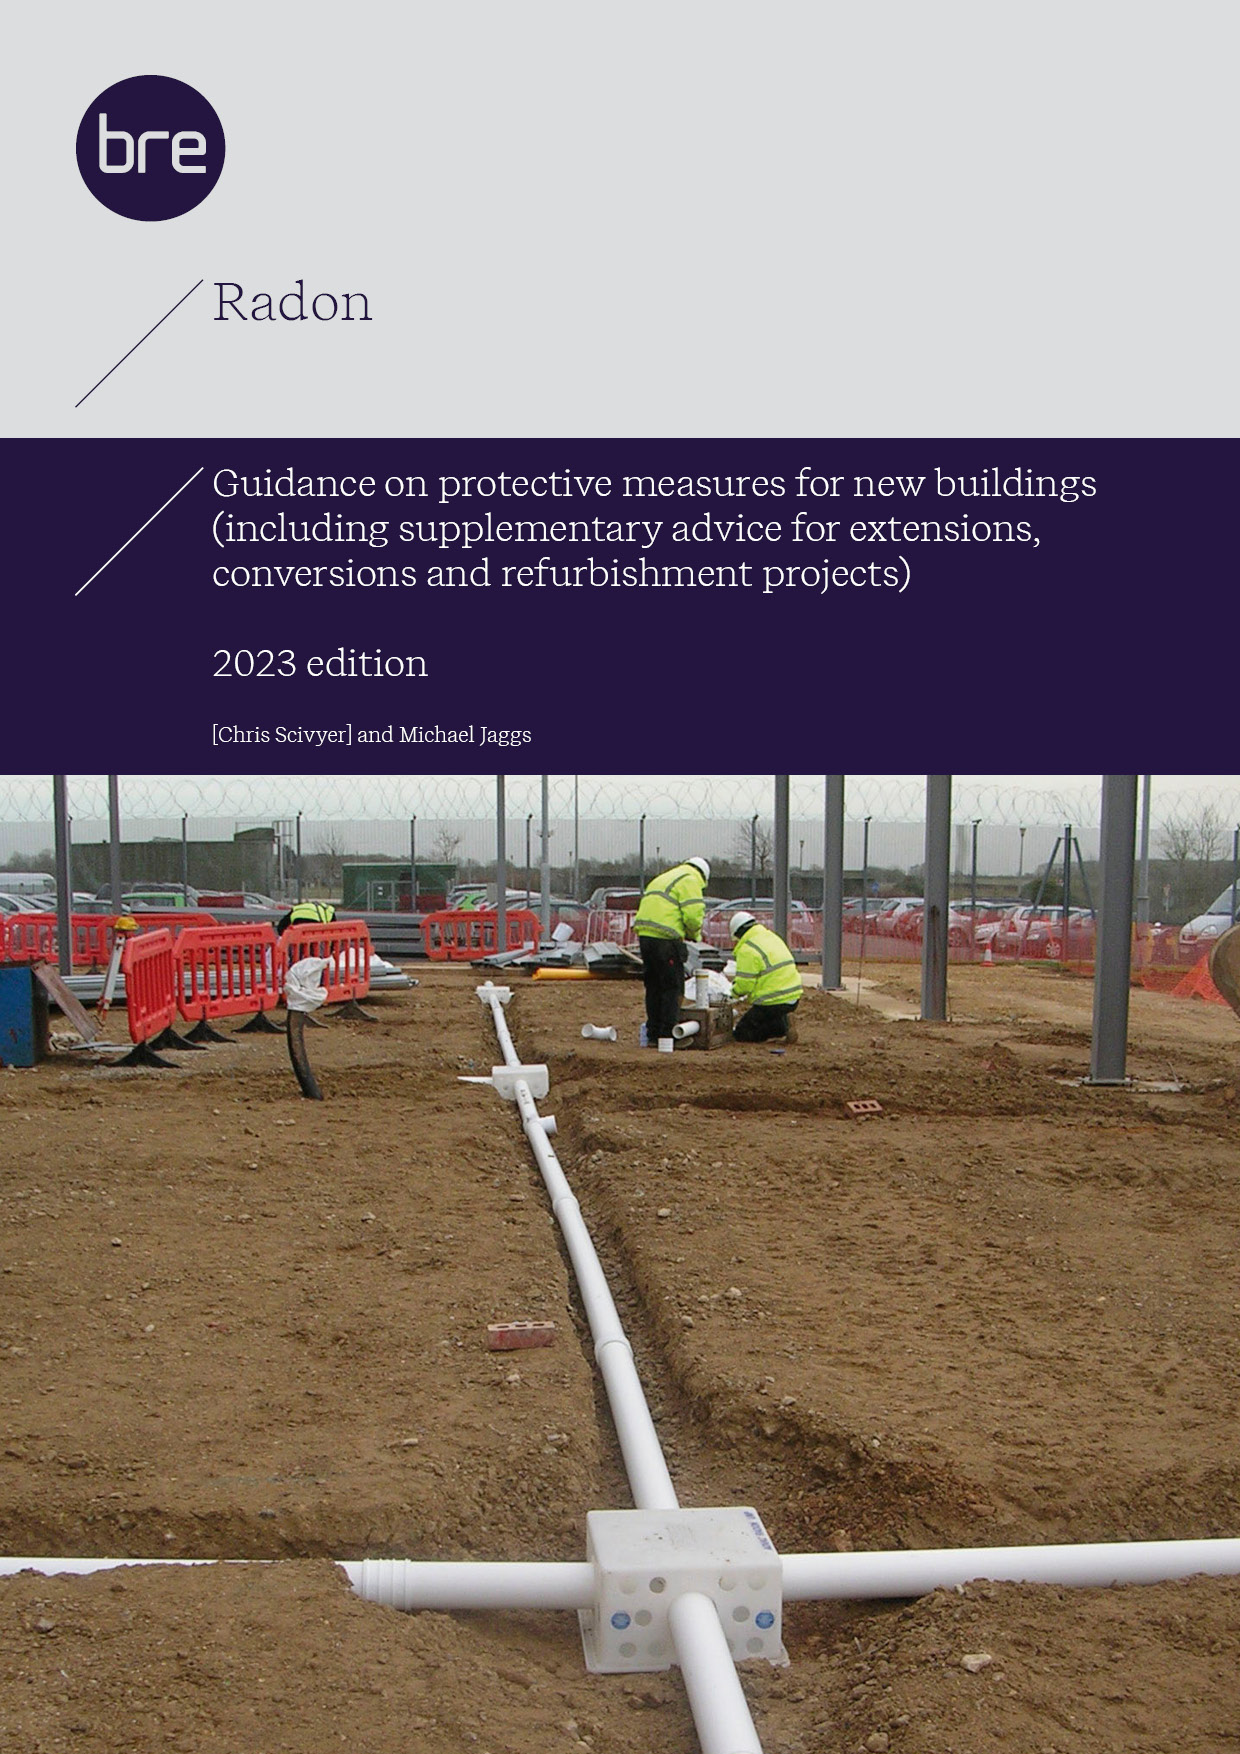 Radon: Guidance on protective measures for new buildings (including supplementary advice for extensions, conversions and refurbishment projects) <b>2023 edition DOWNLOAD</B>